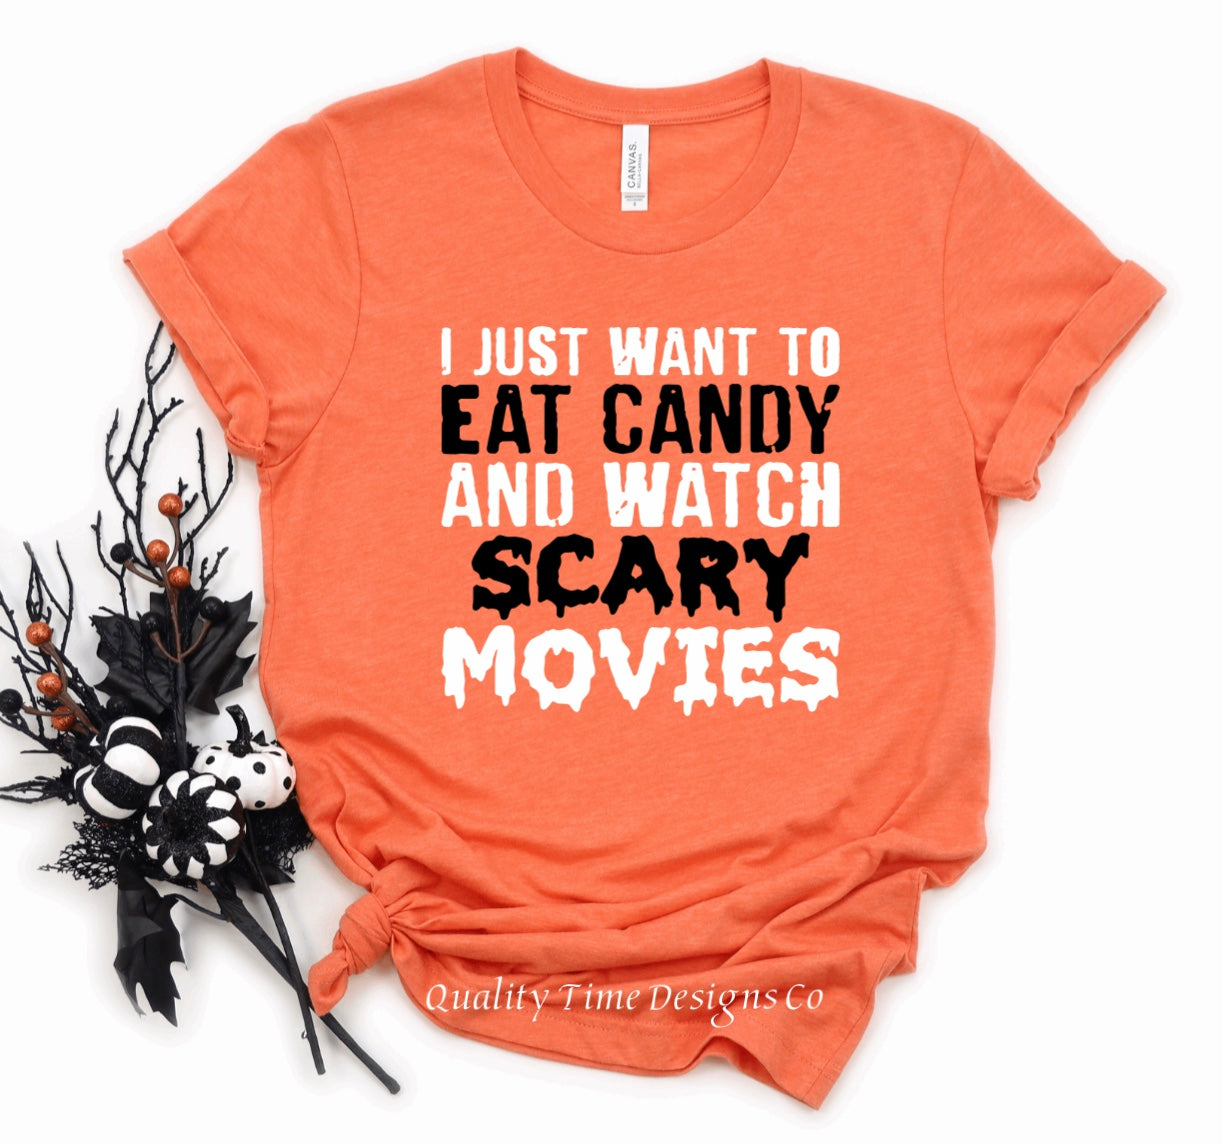 I just want to eat candy and watch scary movies t-shirt 